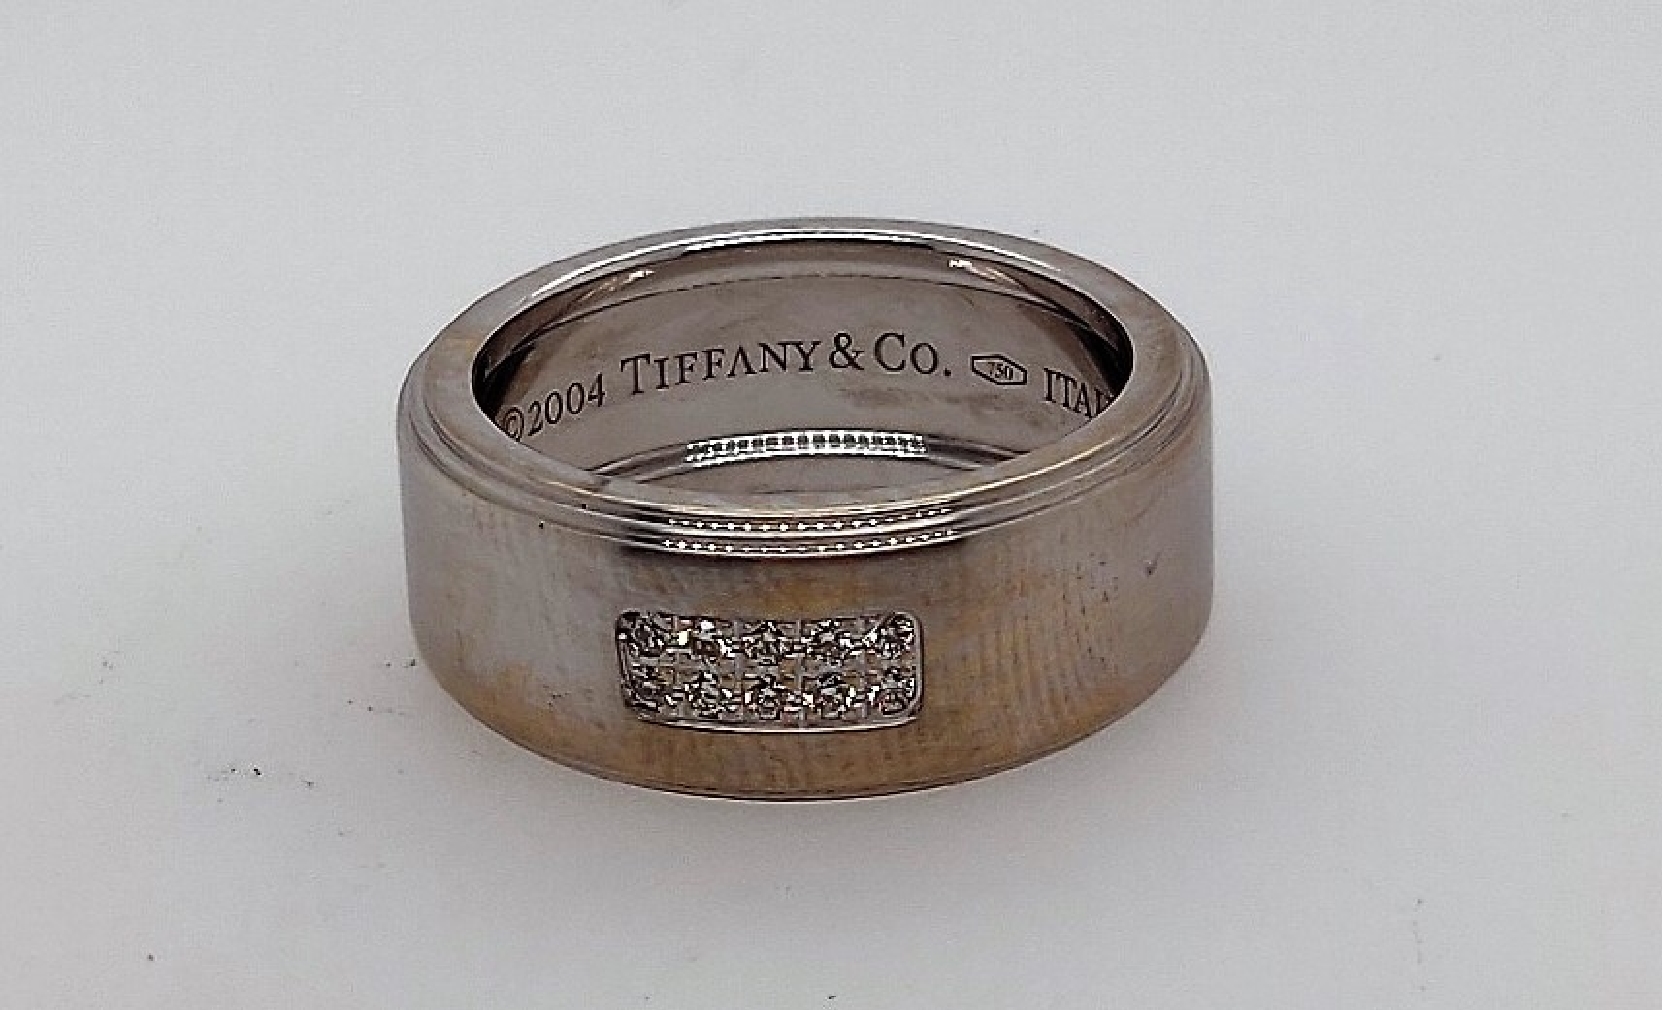 Tiffany and Co 
18kt white gold band with diamonds
0.10CTTW~
size 6.25